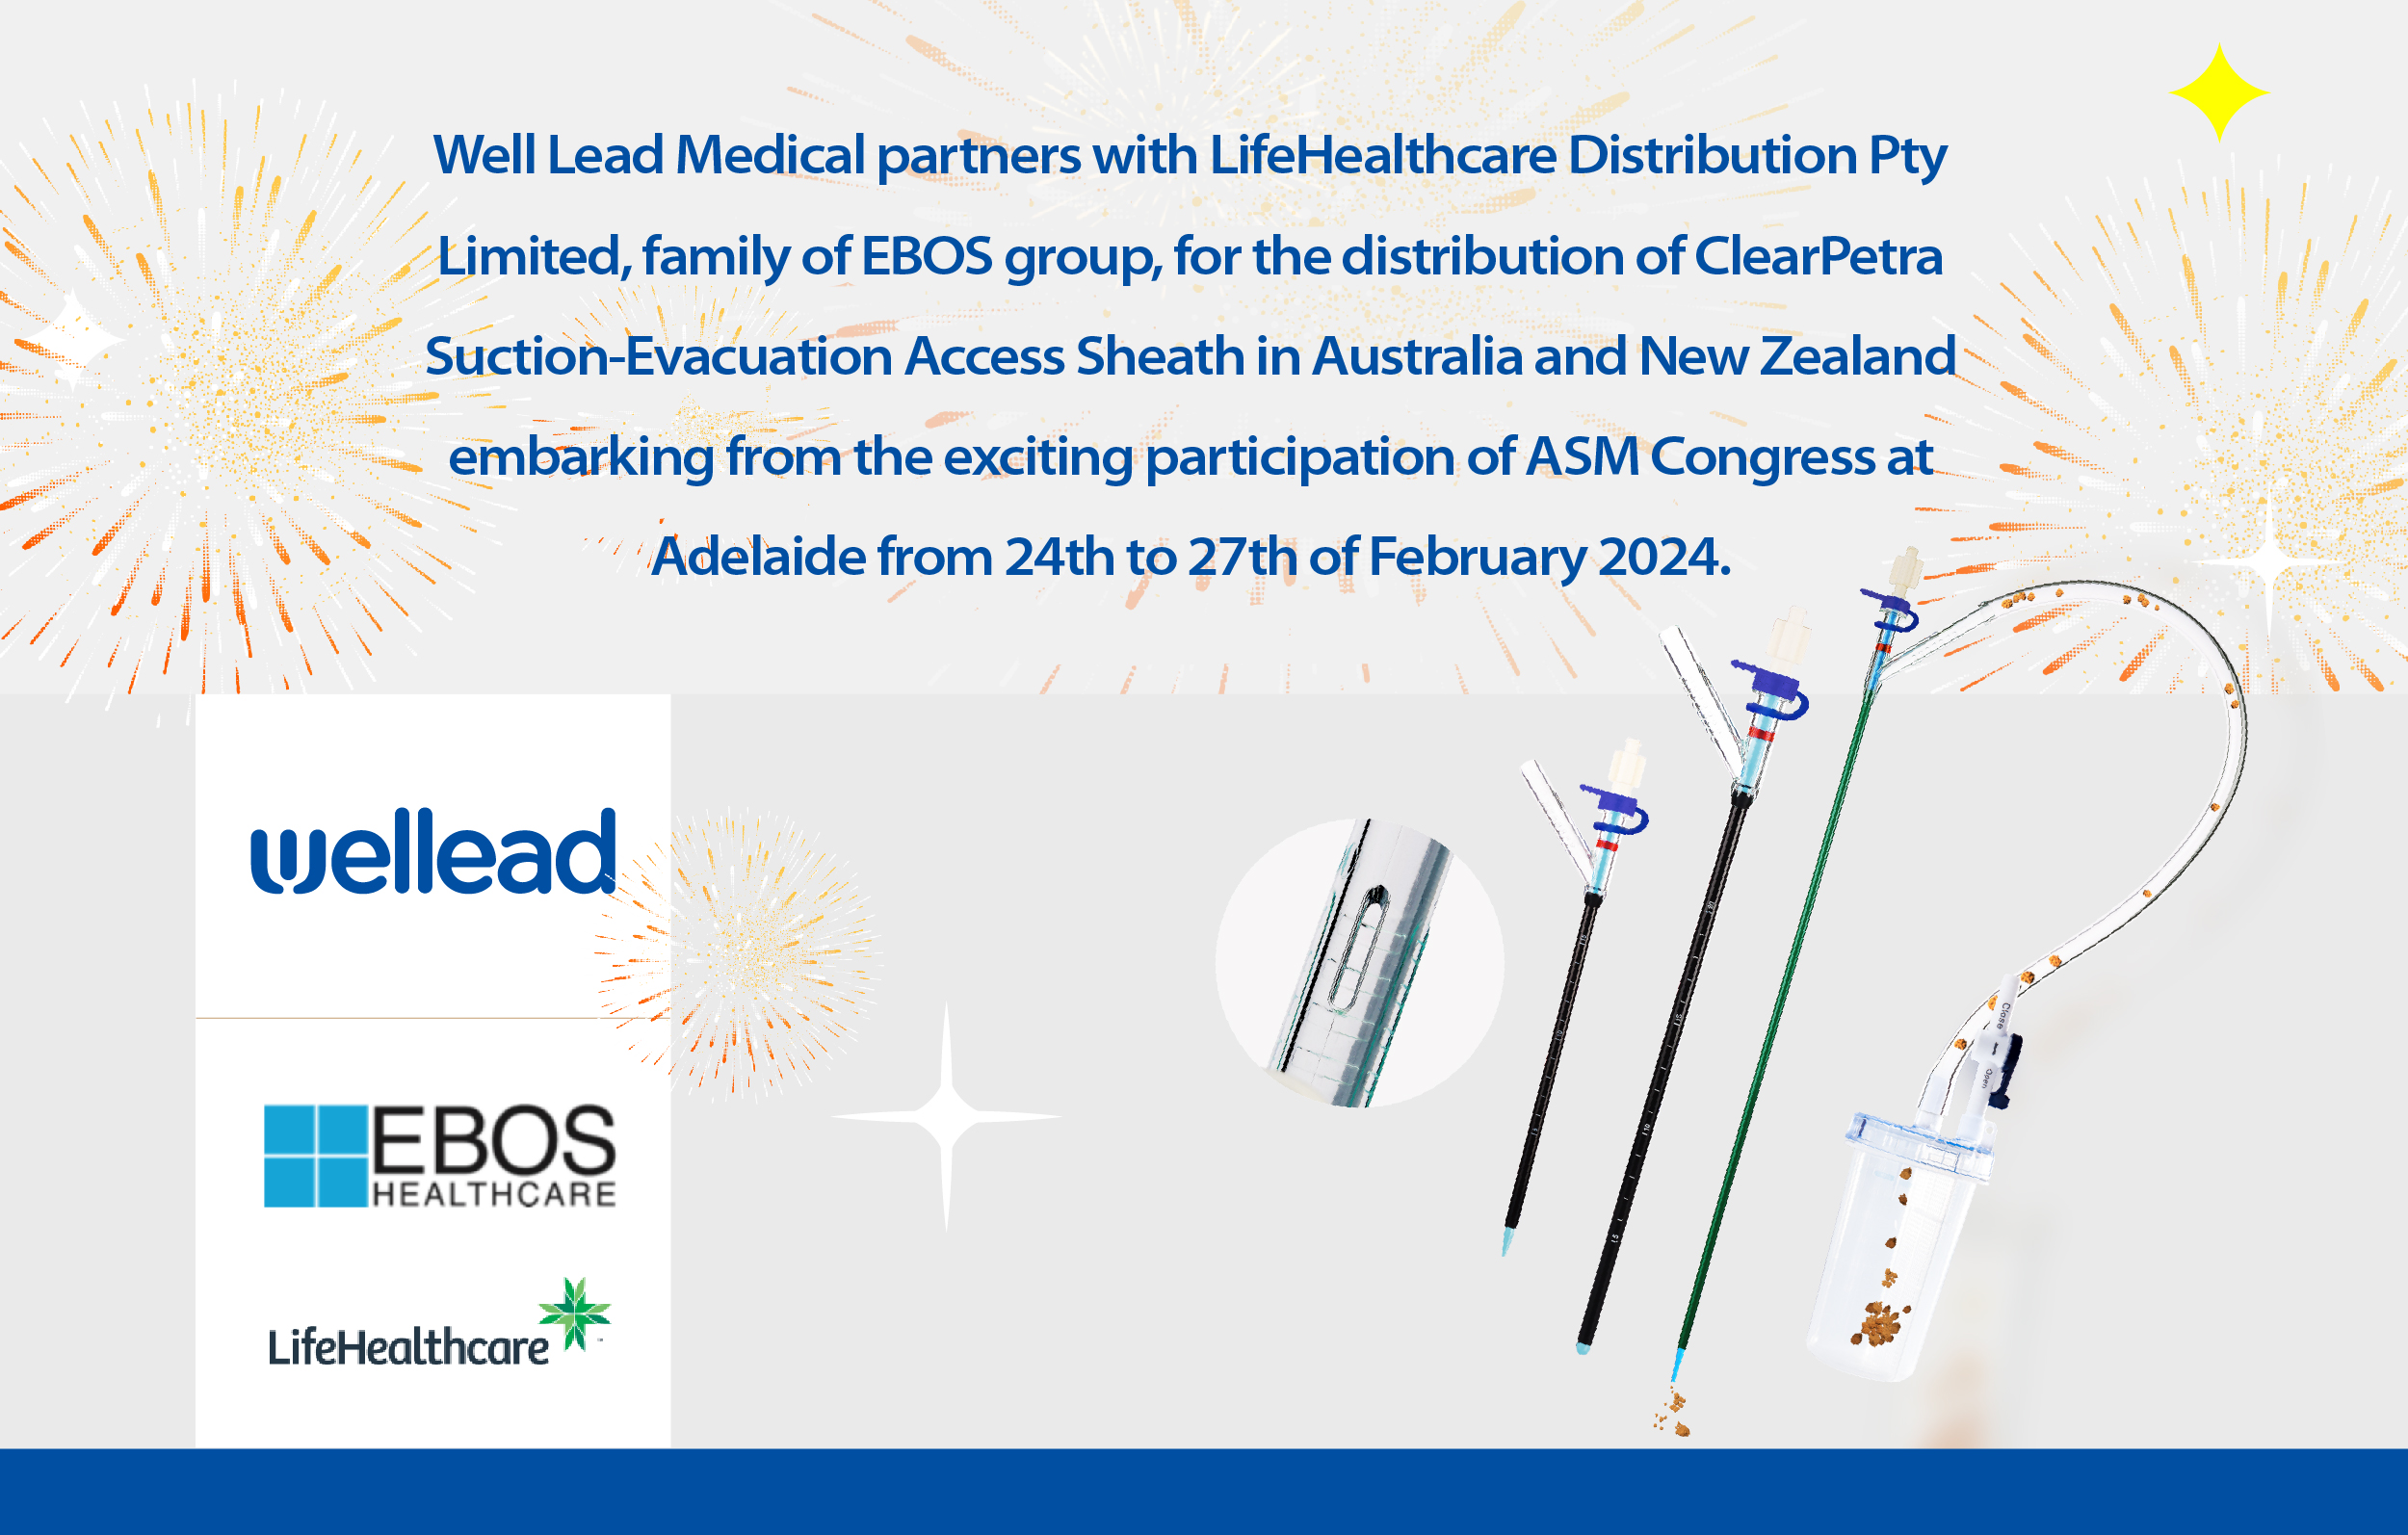 Well Lead Medical partners with LifeHealthcare Distribution Pty Limited, family of EBOS group, for the distribution of ClearPetra Suction-Evacuation Access Sheath in Australia and New Zealand